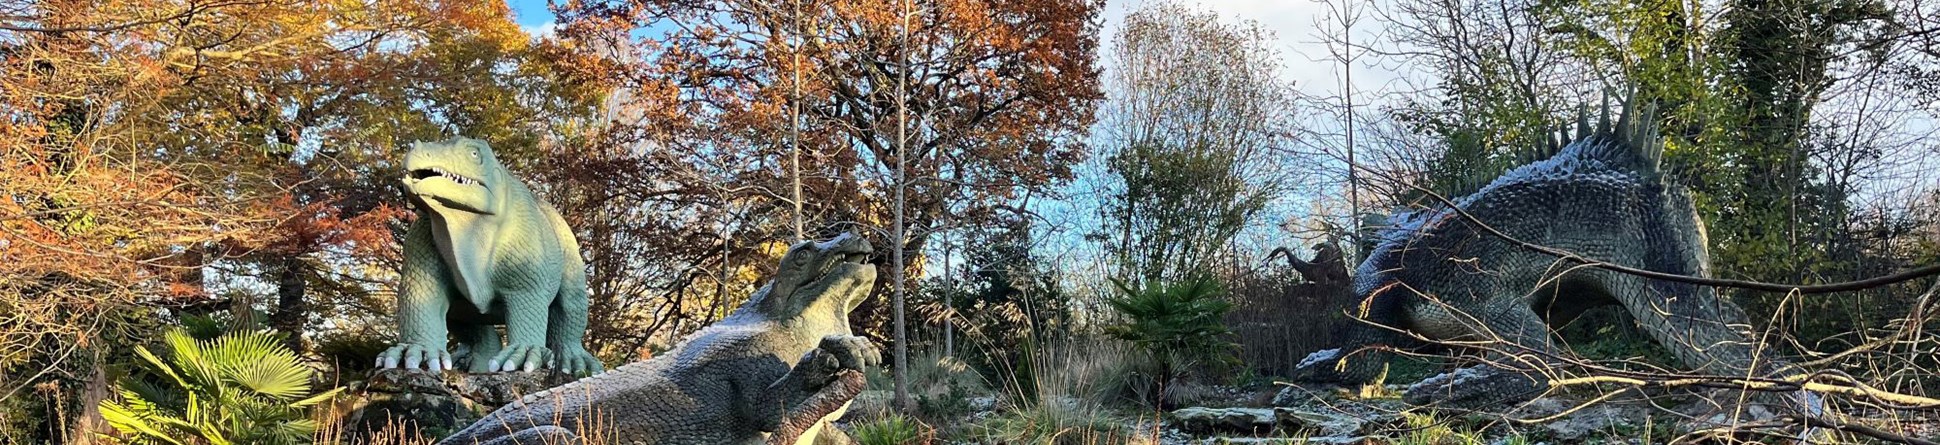 Photograph of three large Dinosaur sculptures in a wintry landscape.